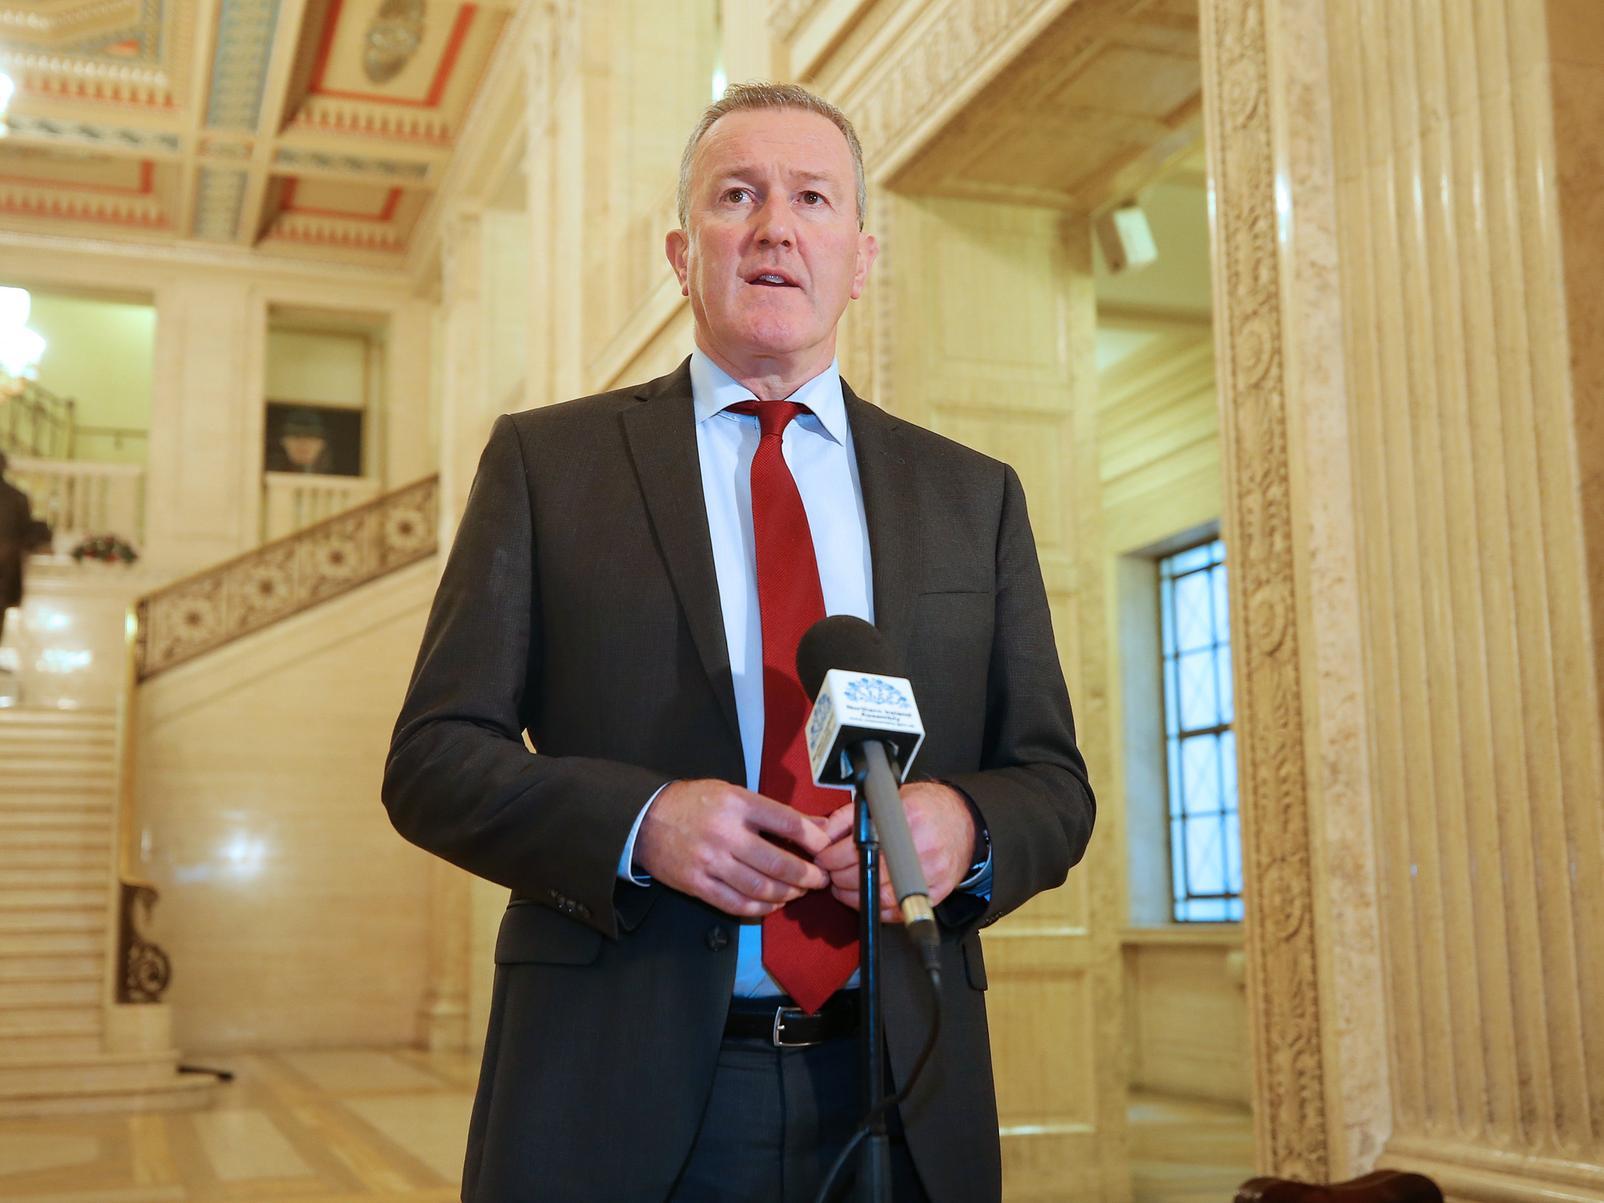 Talks at Stormont today